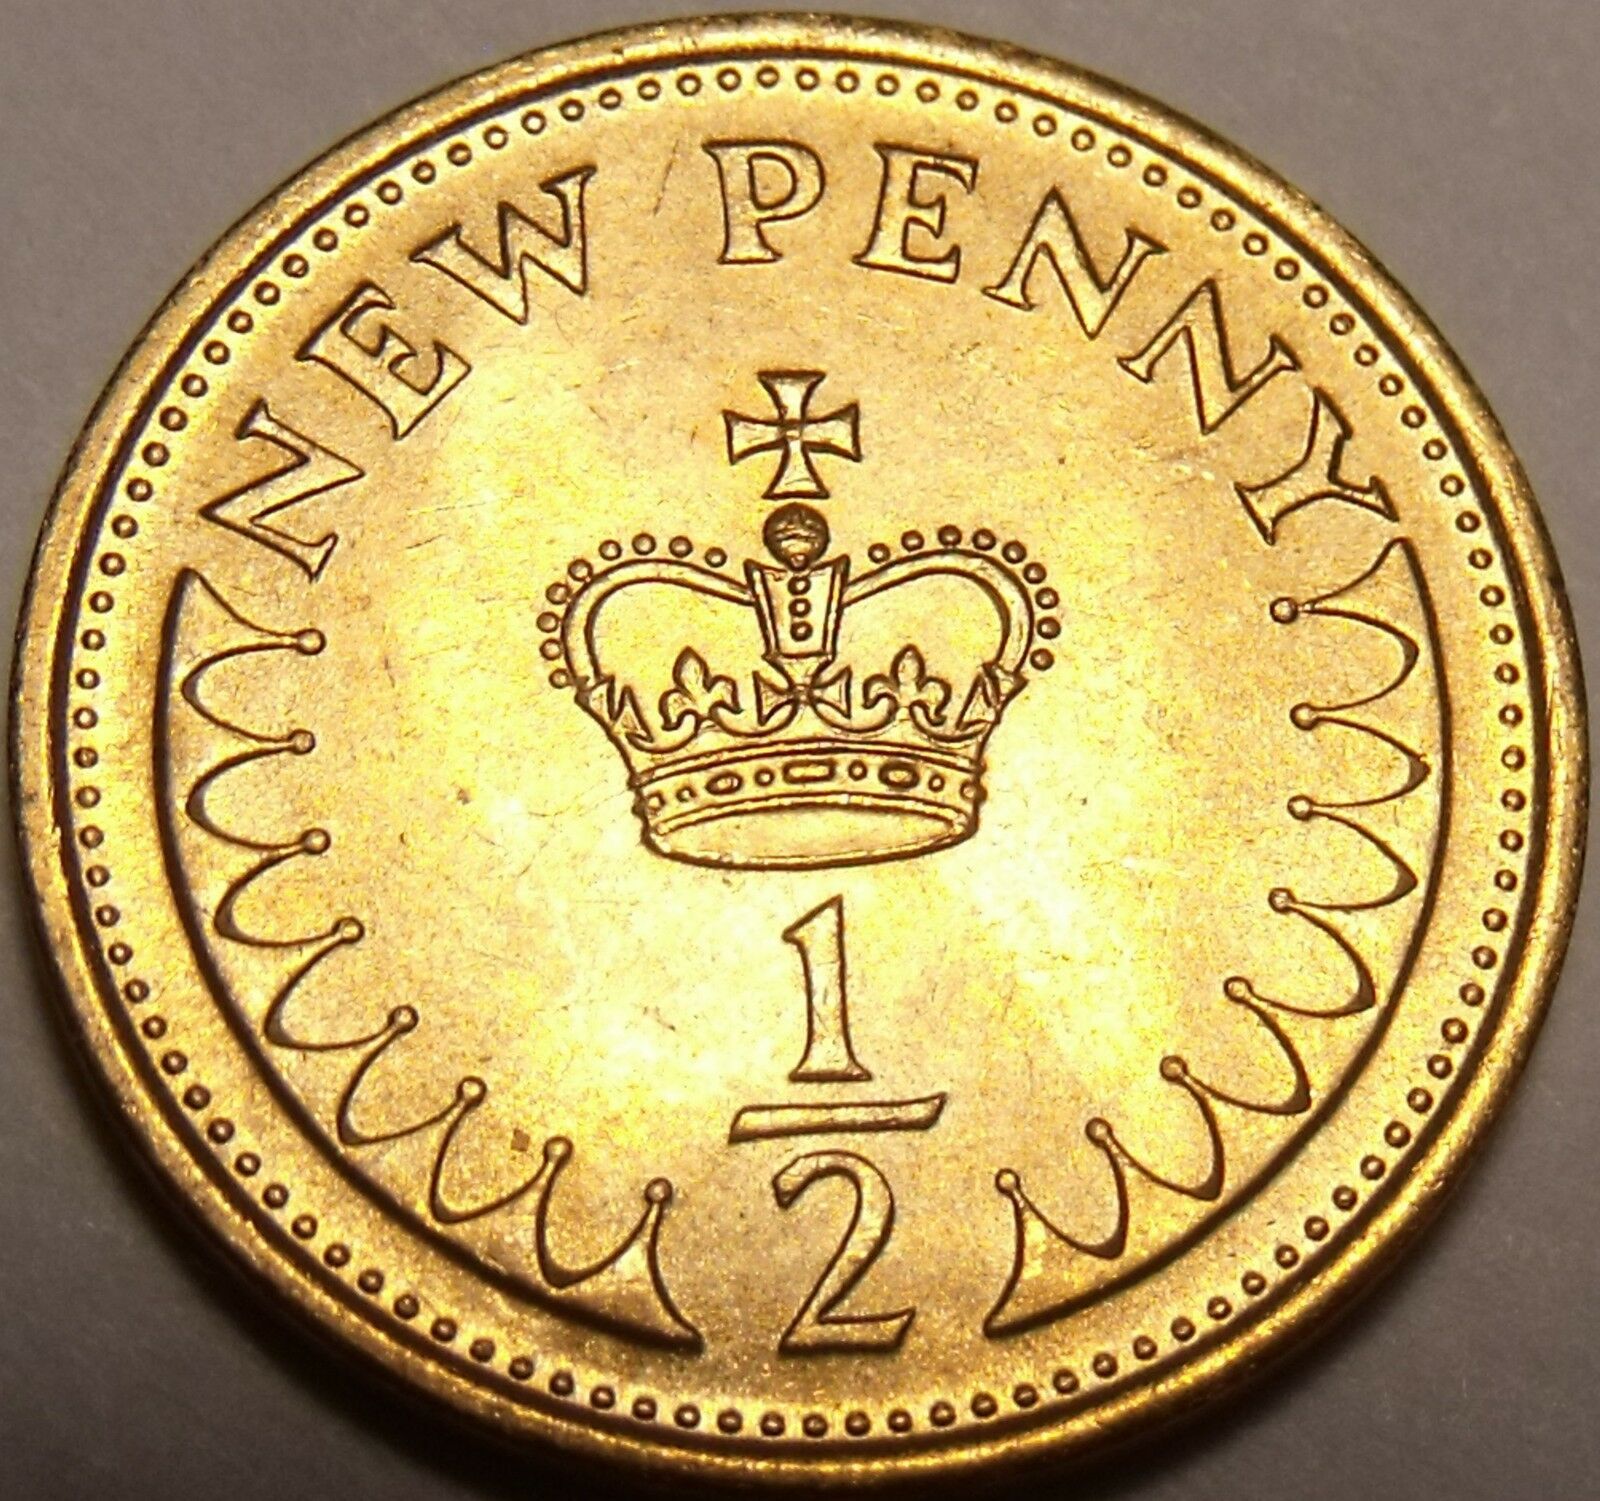 Gem Unc Great Britain 1981 Half New Penny~A Royal Crown~Last Year~Free Shipping - $2.83